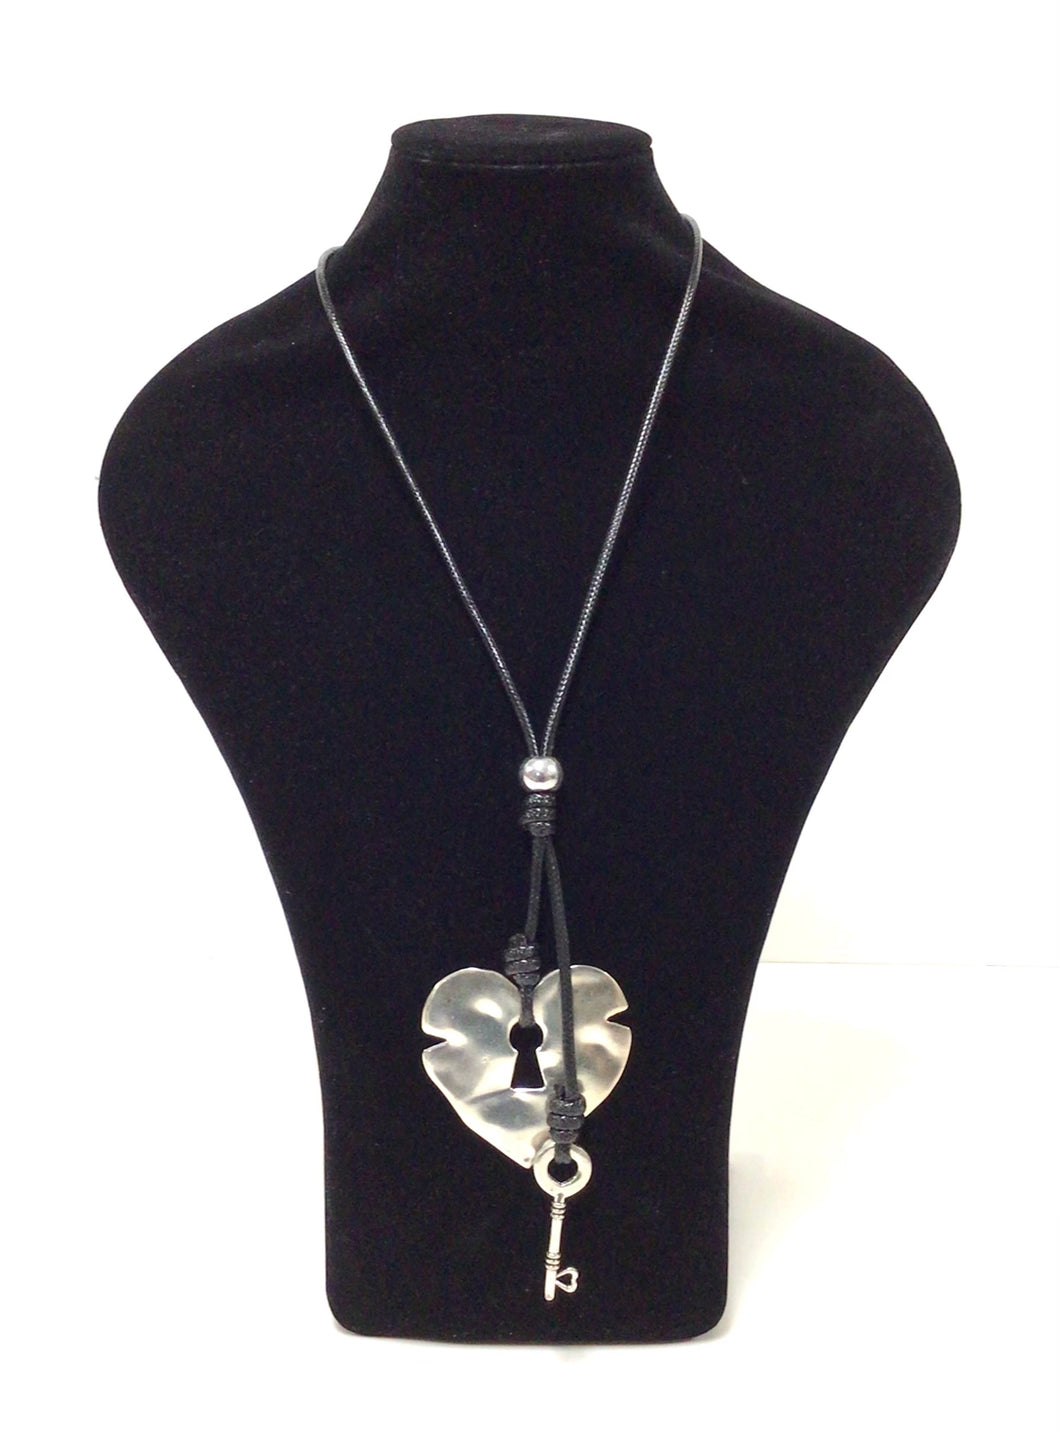 Heart Lock and Key Pendant Necklace. 2.5